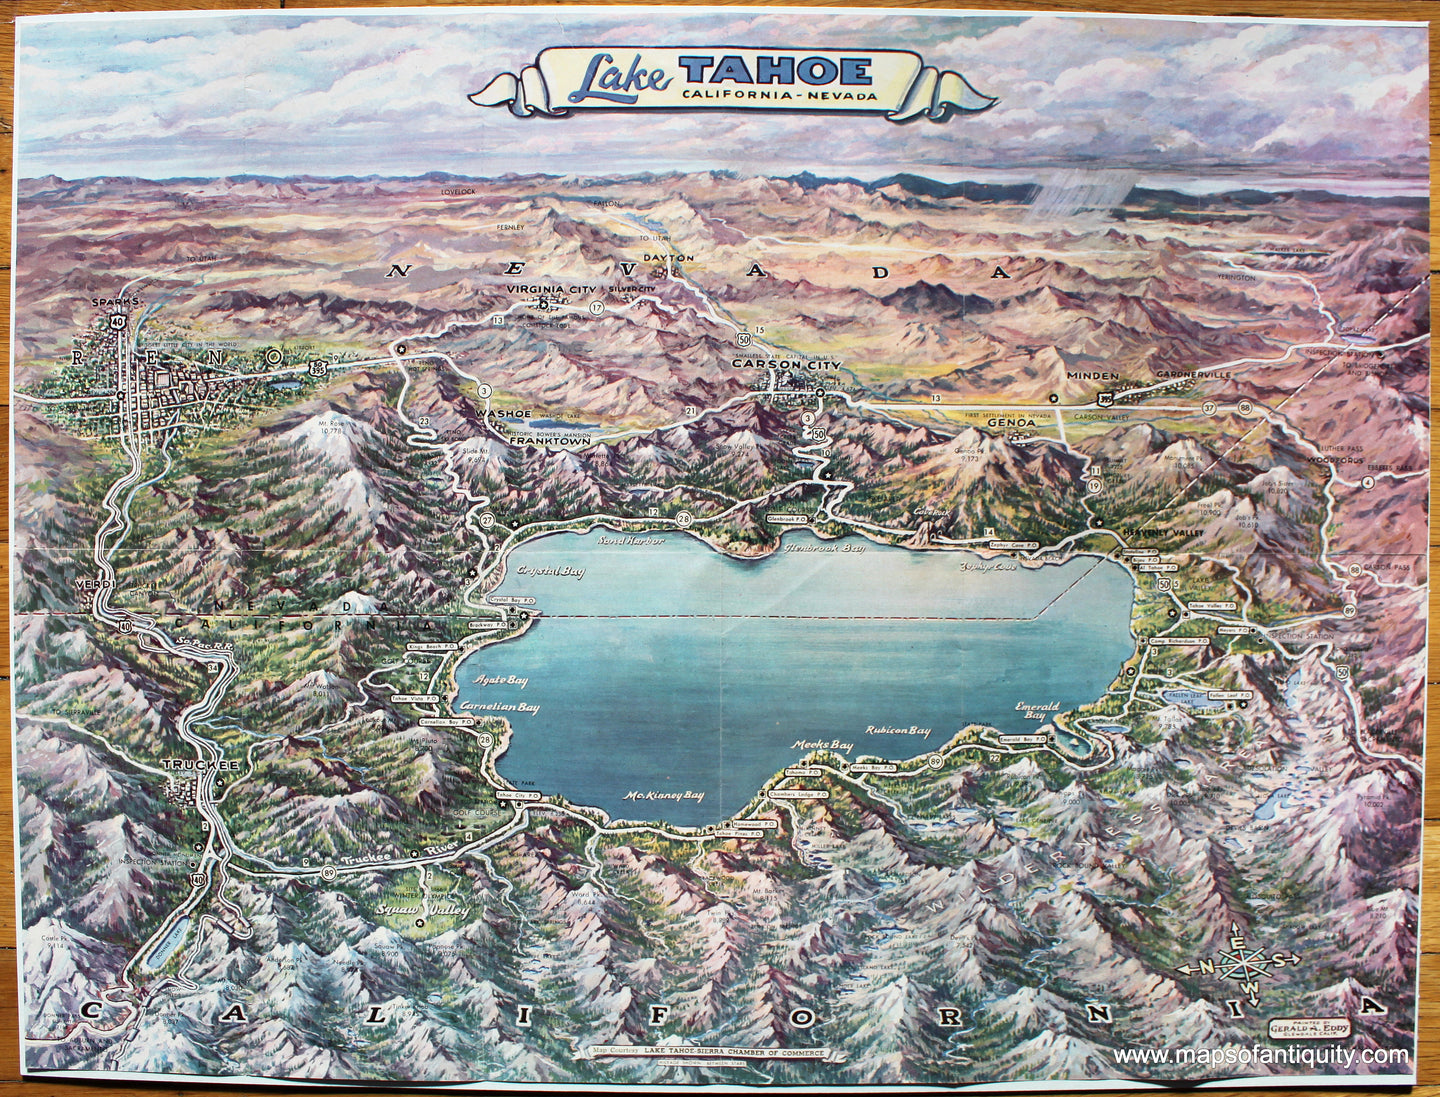 Antique-Printed-Color-Map-Lake-Tahoe-California-Nevada-**********-United-States-West-1957-Sierra-Chamber-of-Commerce-Maps-Of-Antiquity